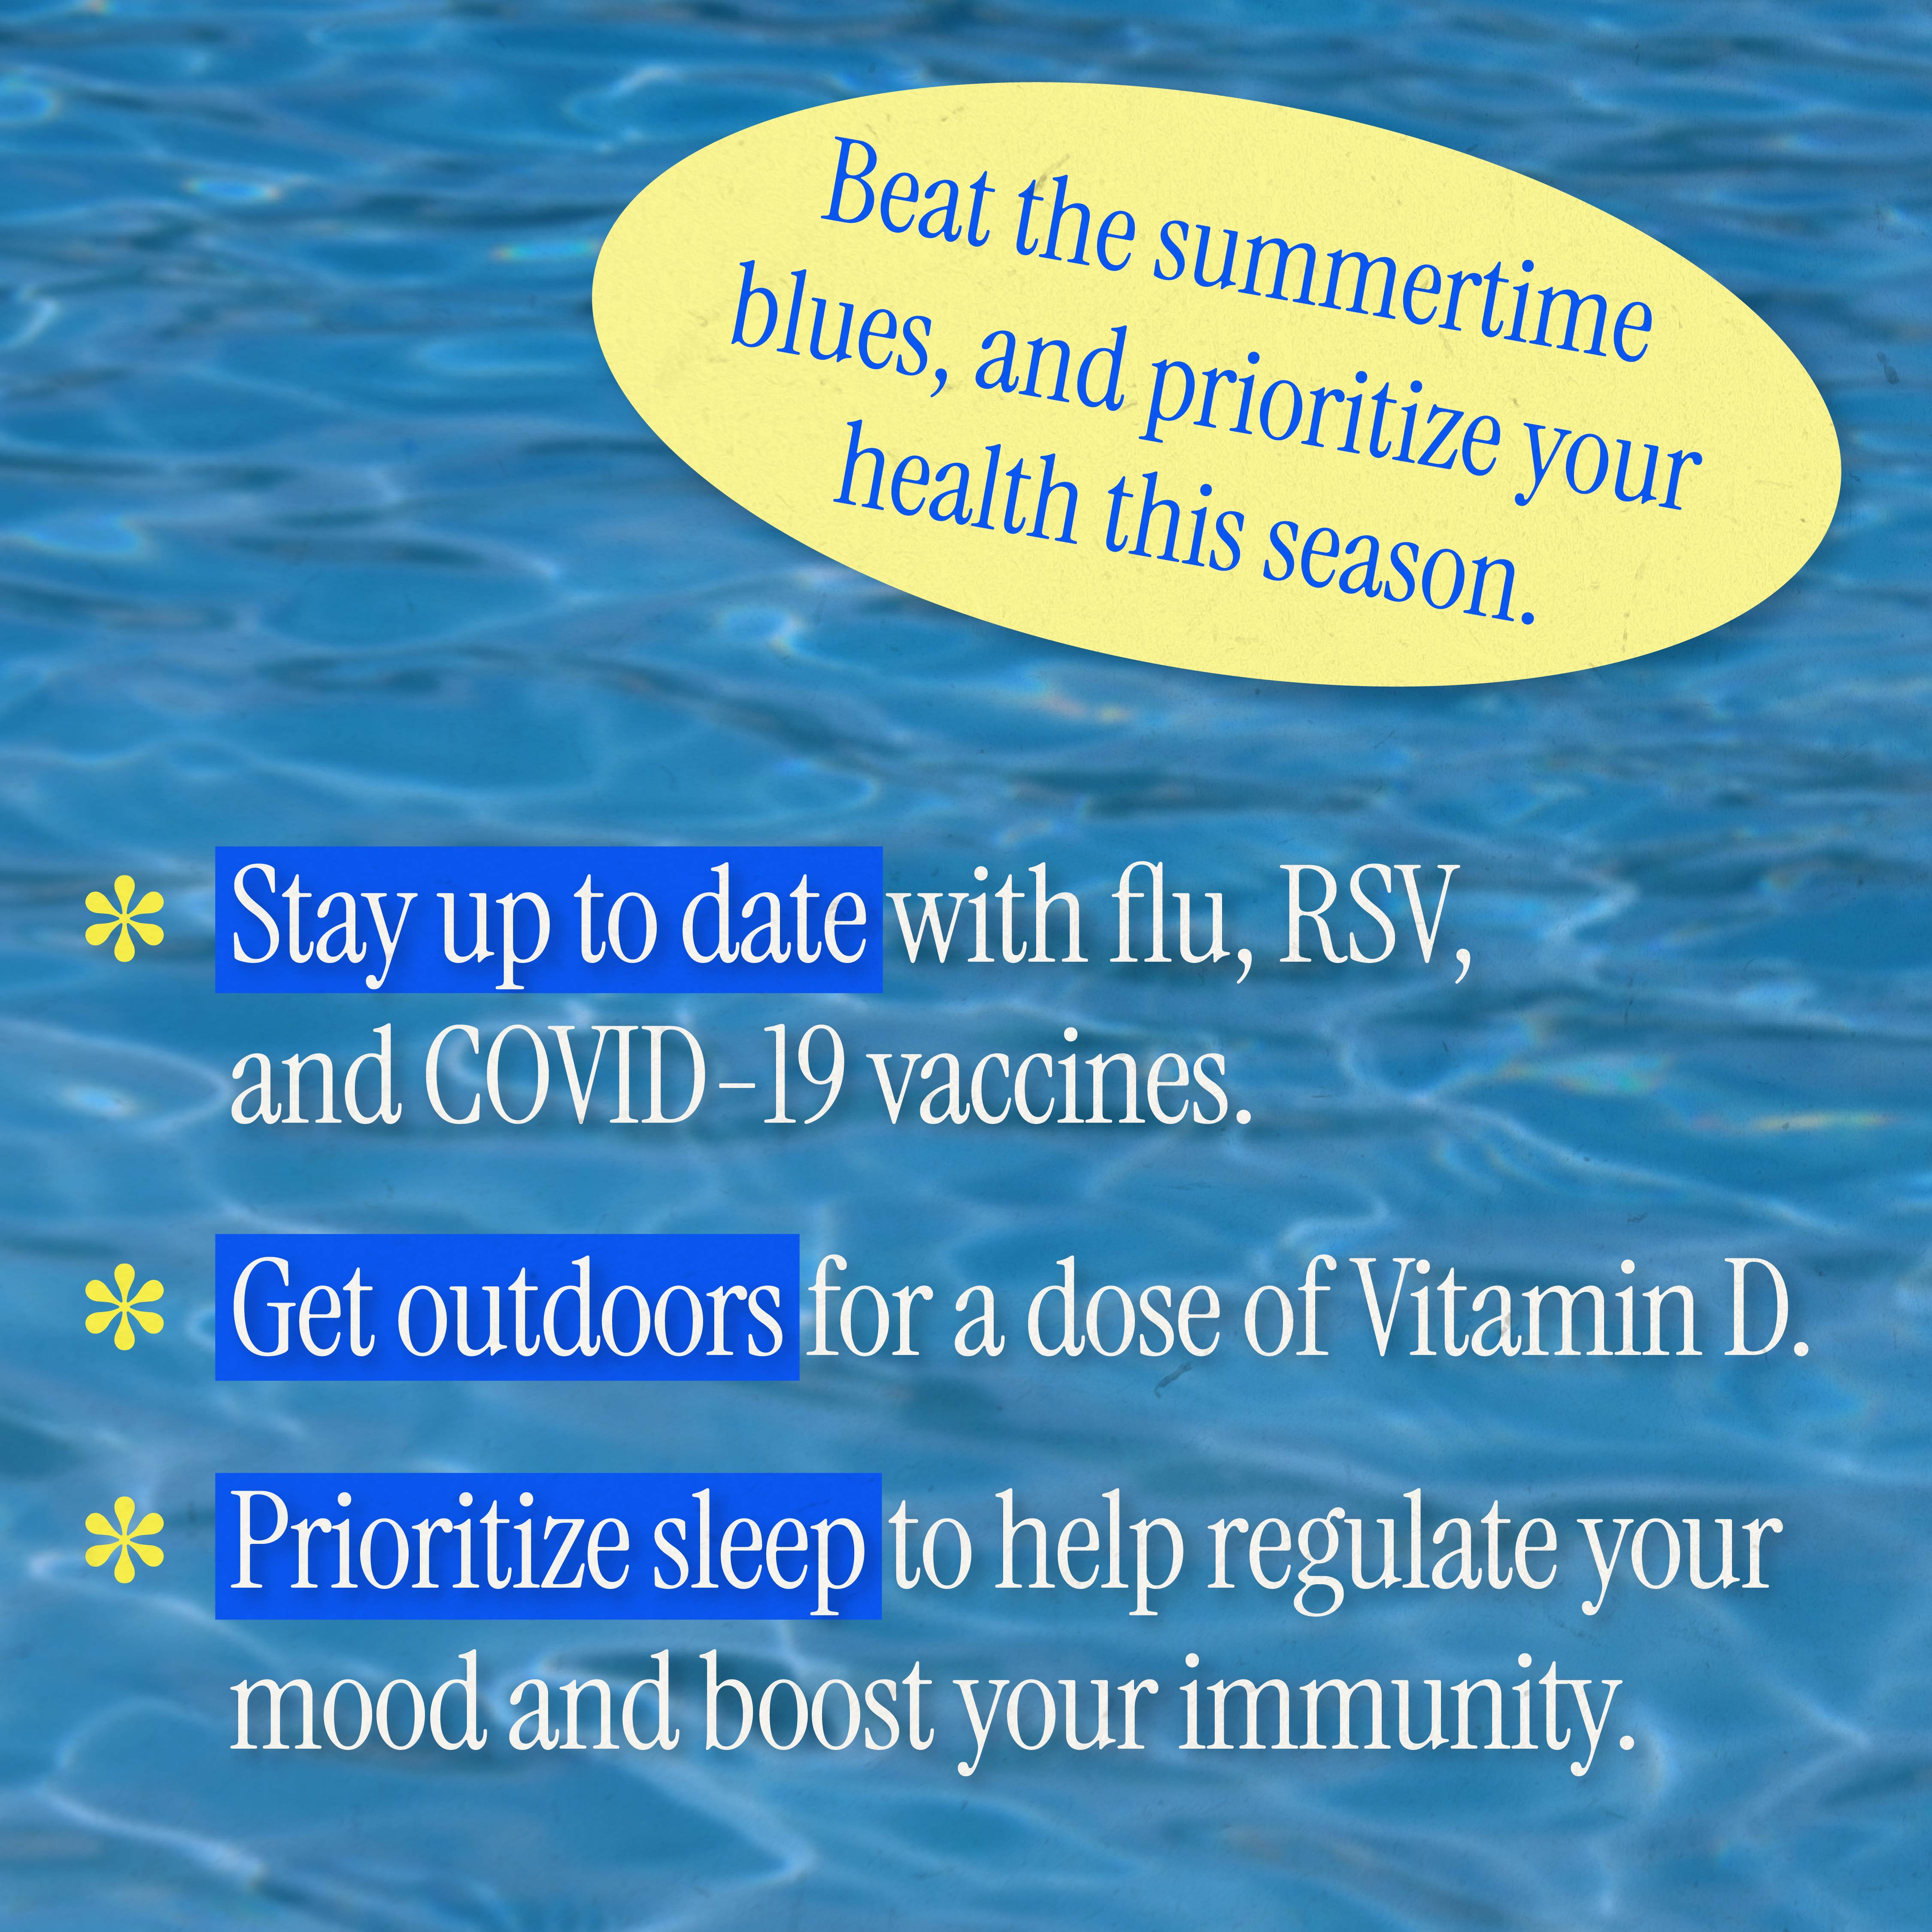 Text against a water background reads, "Beat the summertime blues, and prioritize your health this season. Stay up to date with flu, RSV, and COVID-19 vaccines. Get outdoors for a dose of Vitamin D. Prioritize sleep to help regulate your mood and boost your immunity."